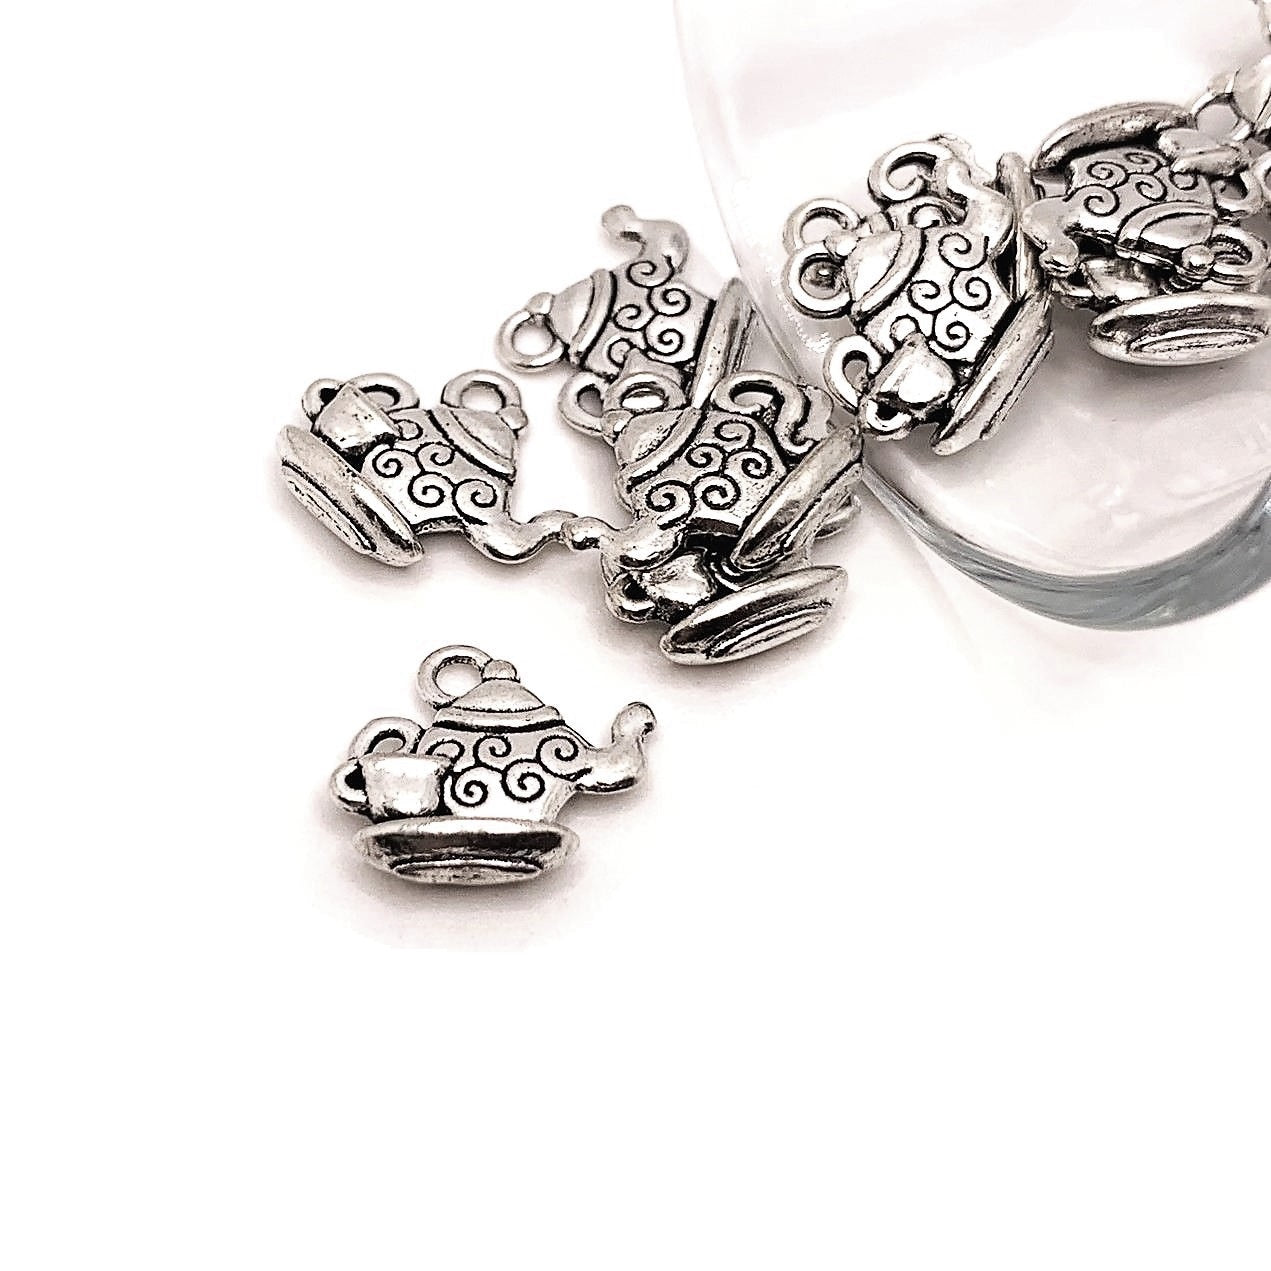 4, 20 or 50 Pieces: Silver Teapot Charms - Double Sided